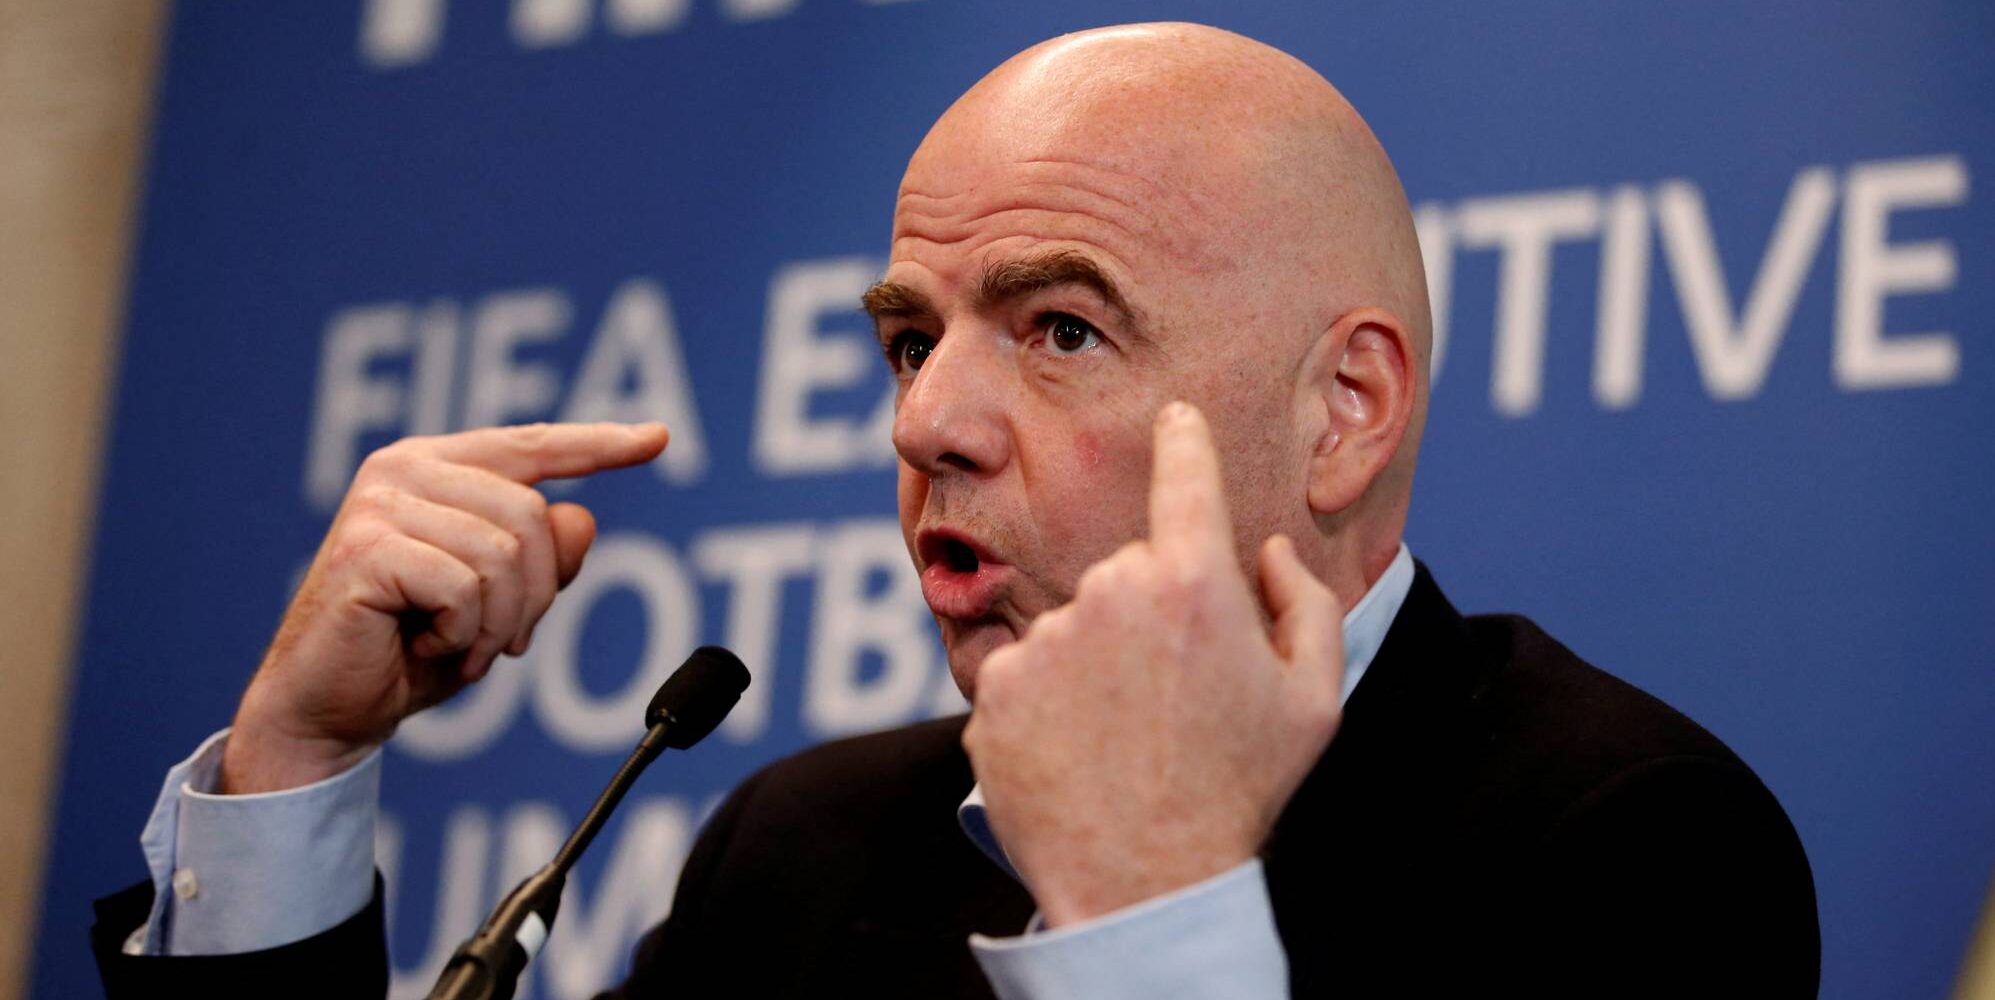 FILE PHOTO: FIFA president Gianni Infantino during the press conference